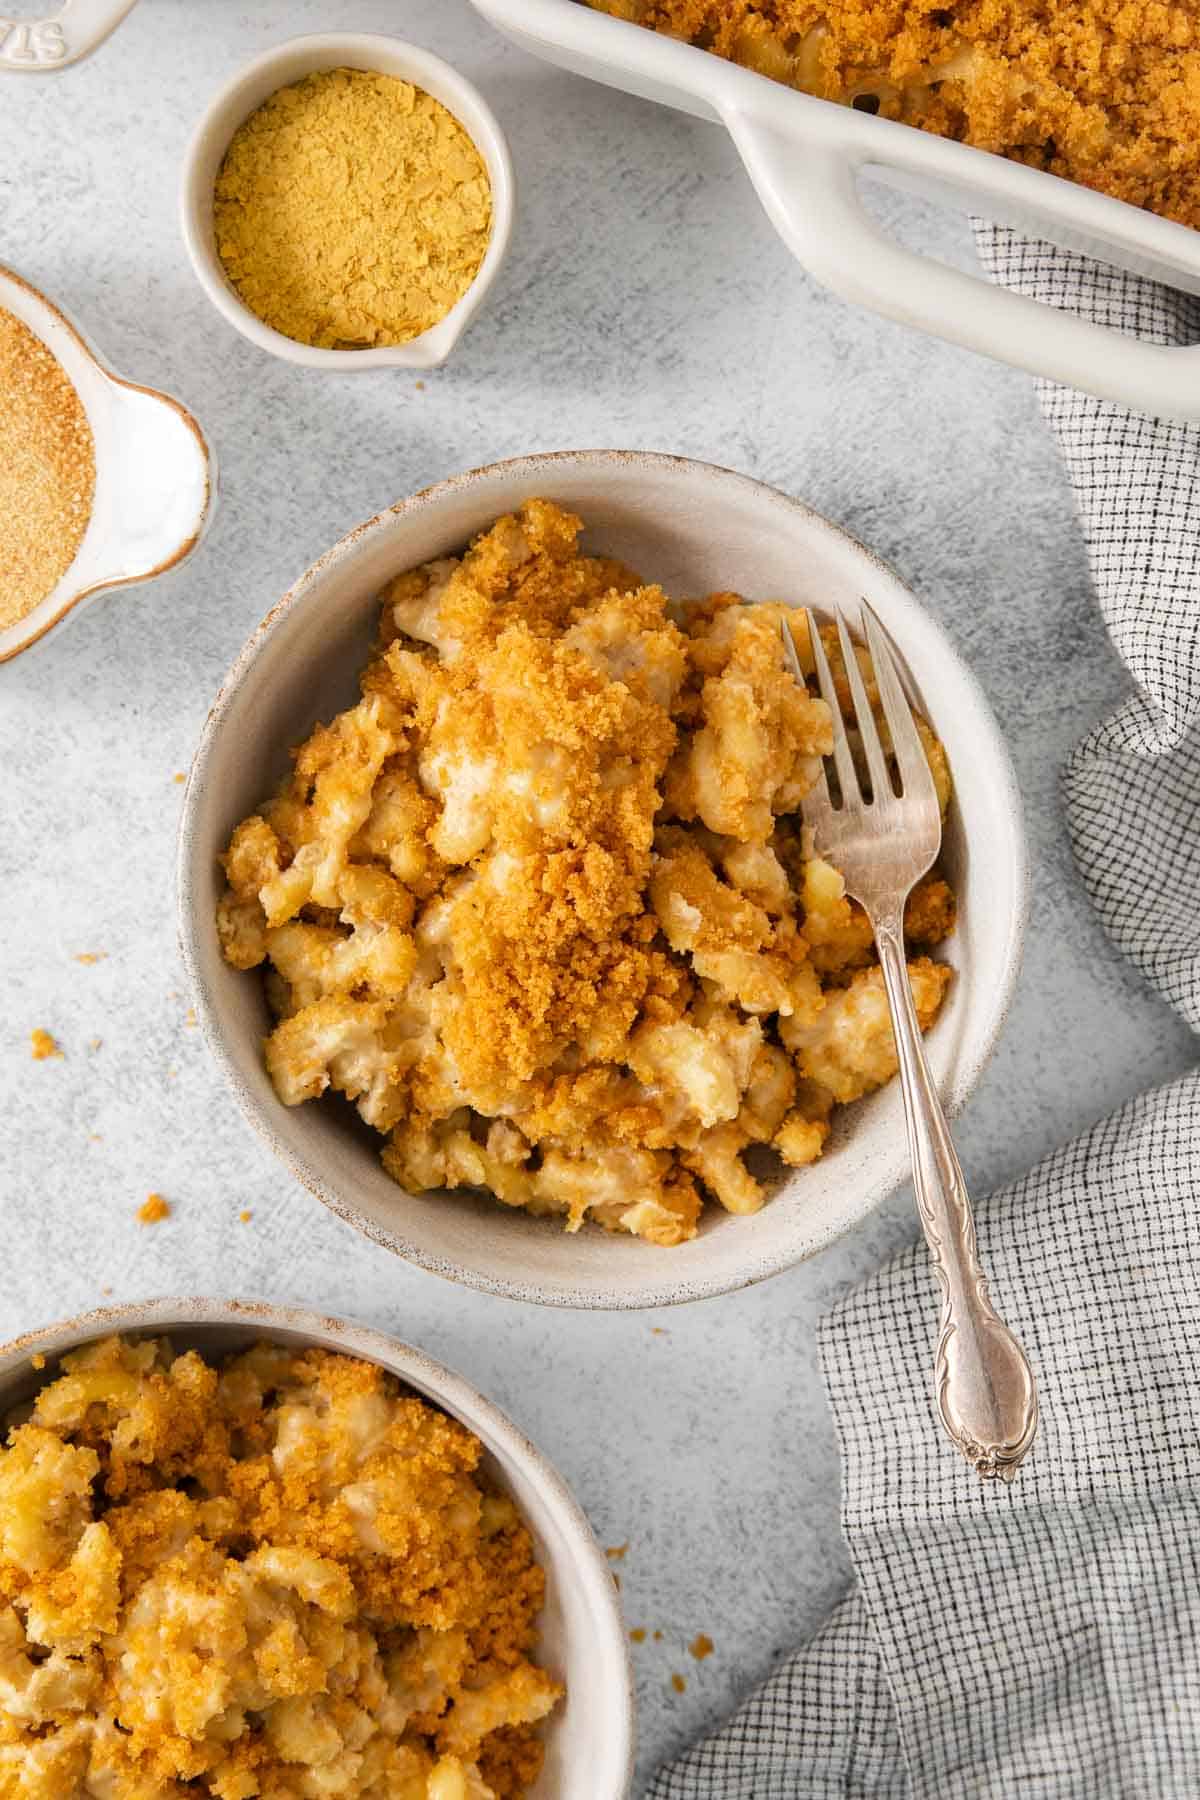 Dairy-free mac and cheese in a bowl with a fork